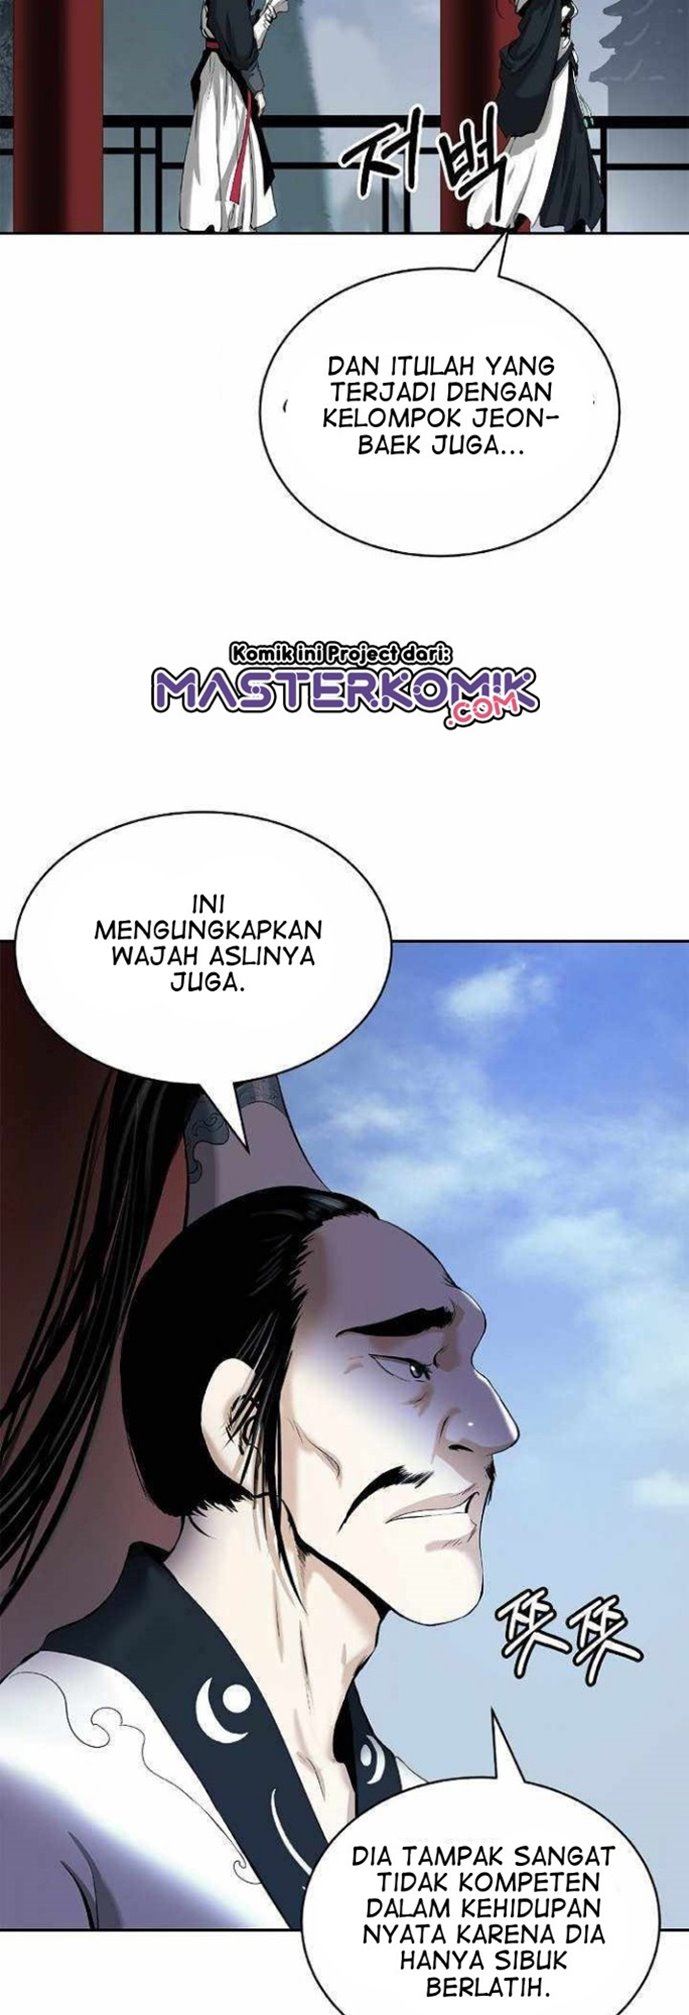 Cystic Story Chapter 51